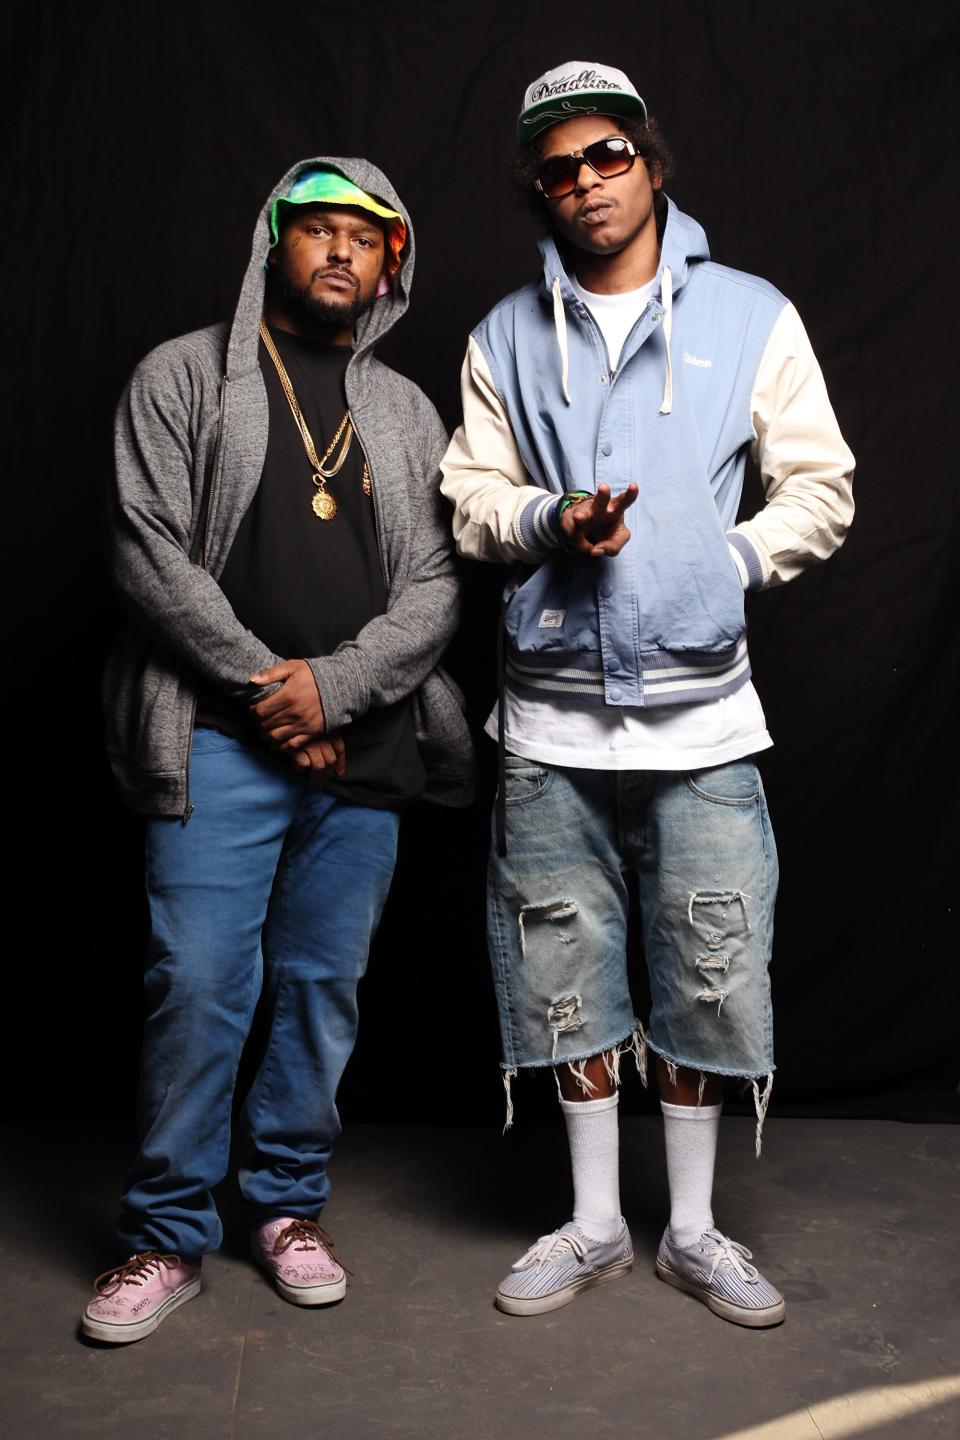 Schoolboy Q and Ab-Soul during SXSW in Austin, Texas, March 2013